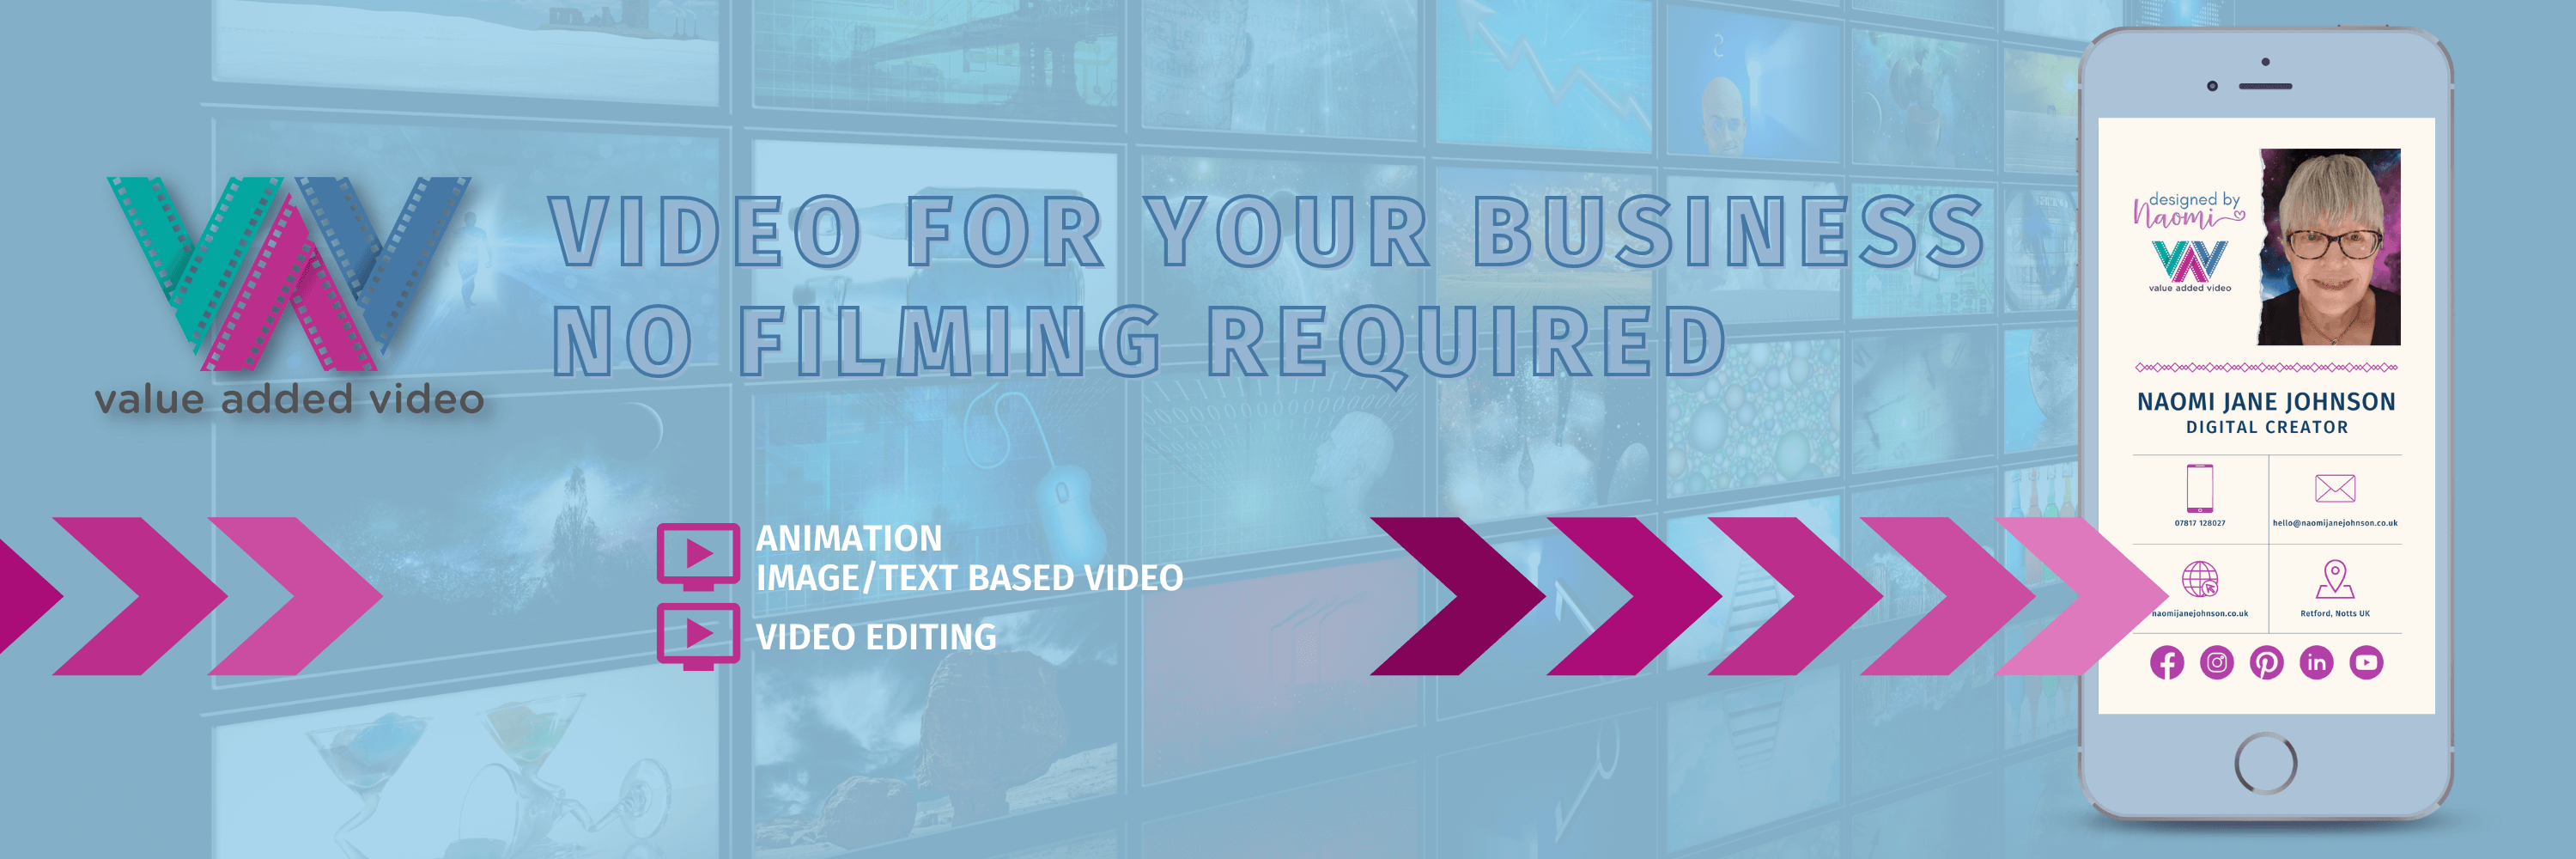 value added video promotional video for businesses